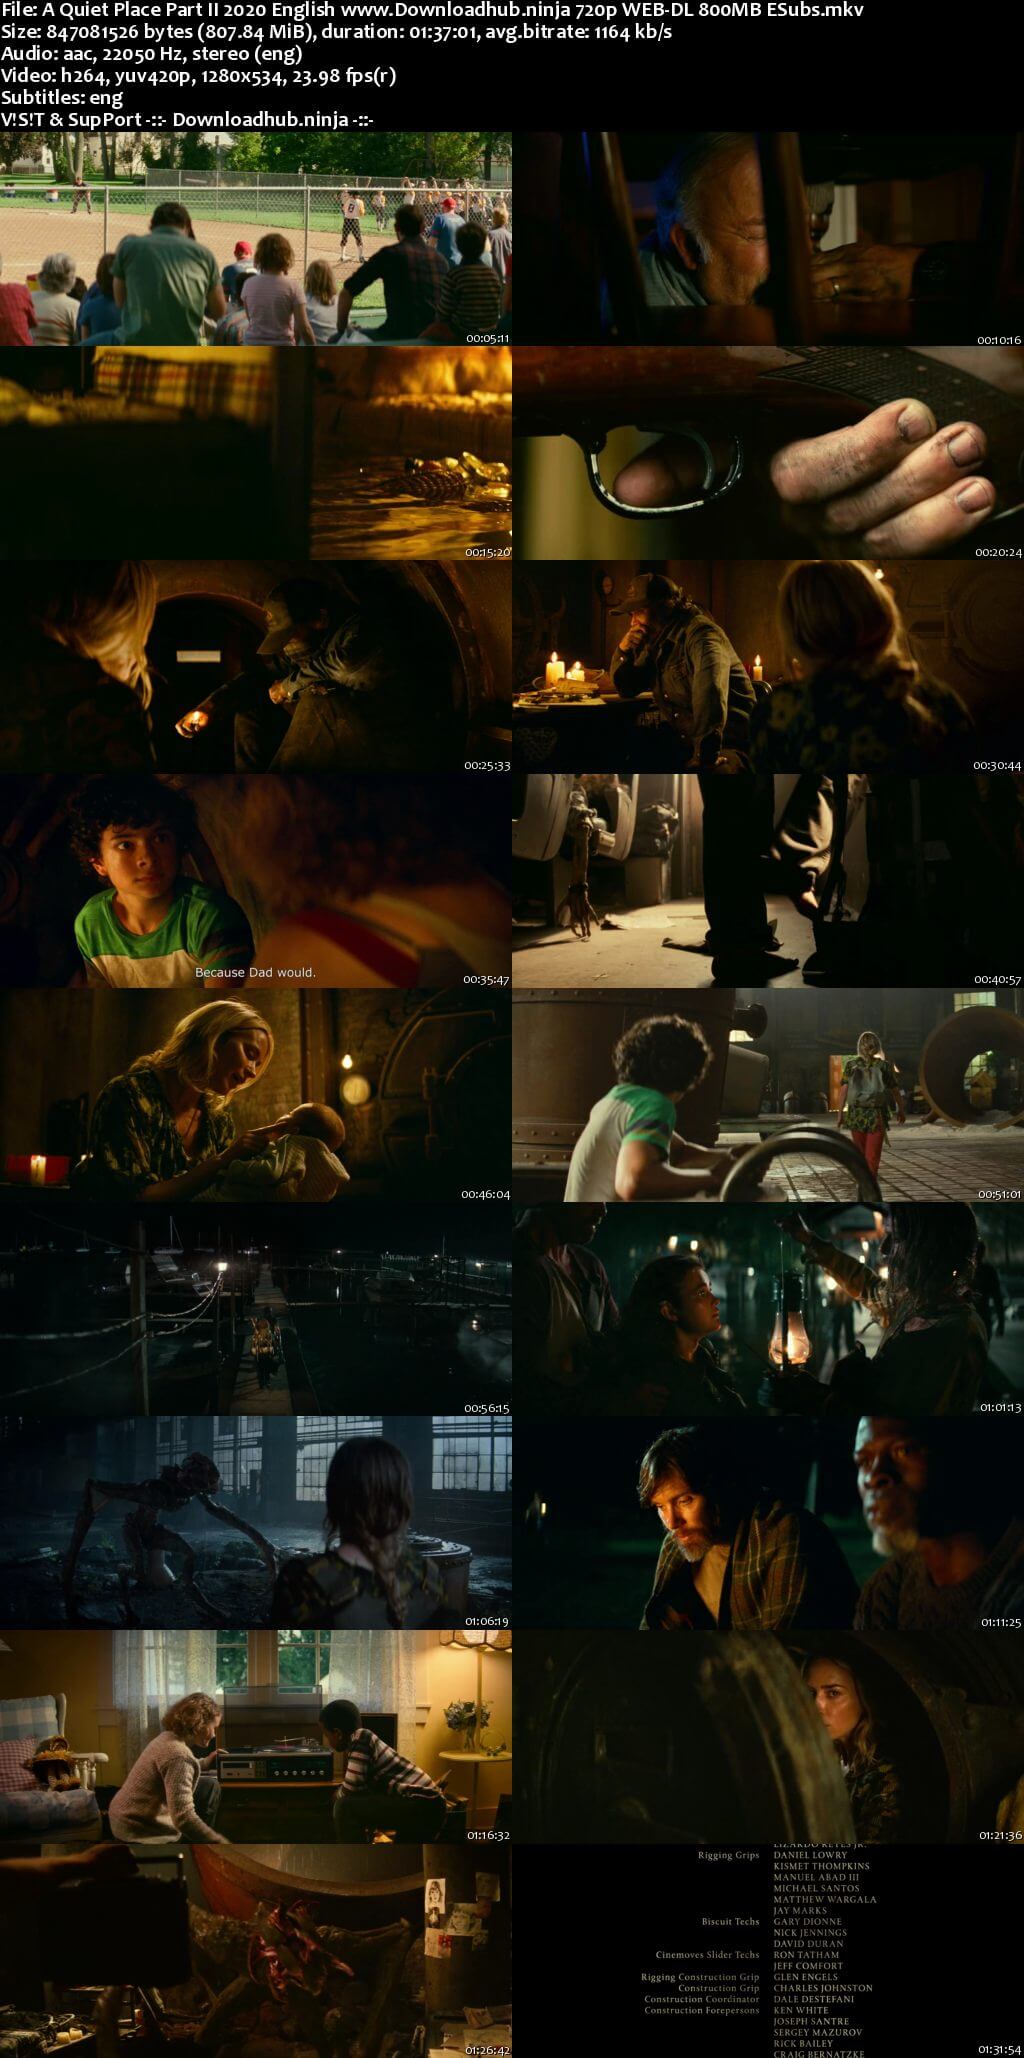 A Quiet Place Part II 2021 English 720p Web-DL 800MB ESubs